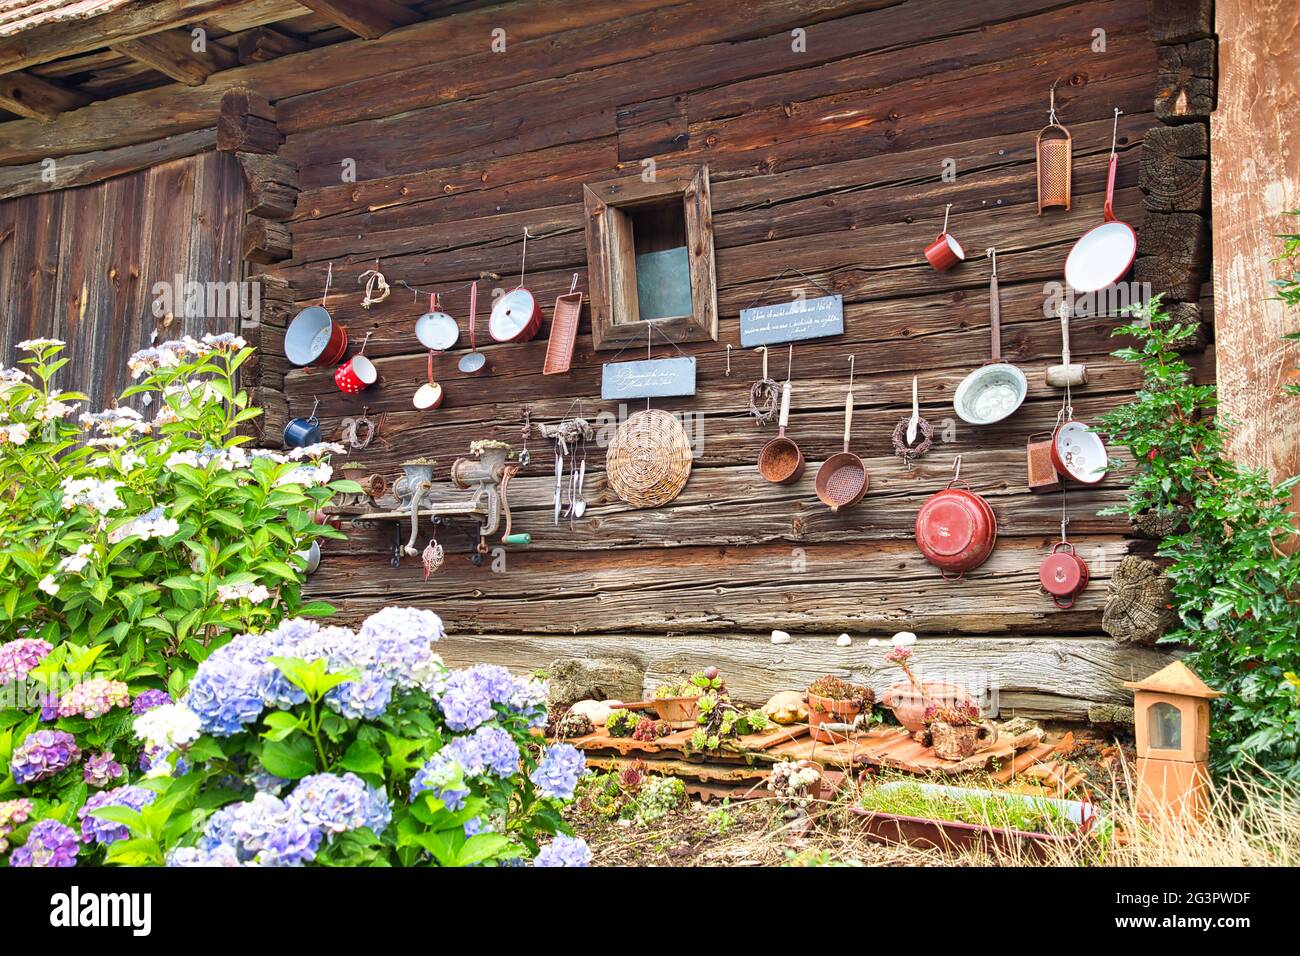 AUSTRIA, STYRIA, ST. MARTIN IM SULMTAL - JULY 24, 2020: Pretty house decoration from used household goods Stock Photo